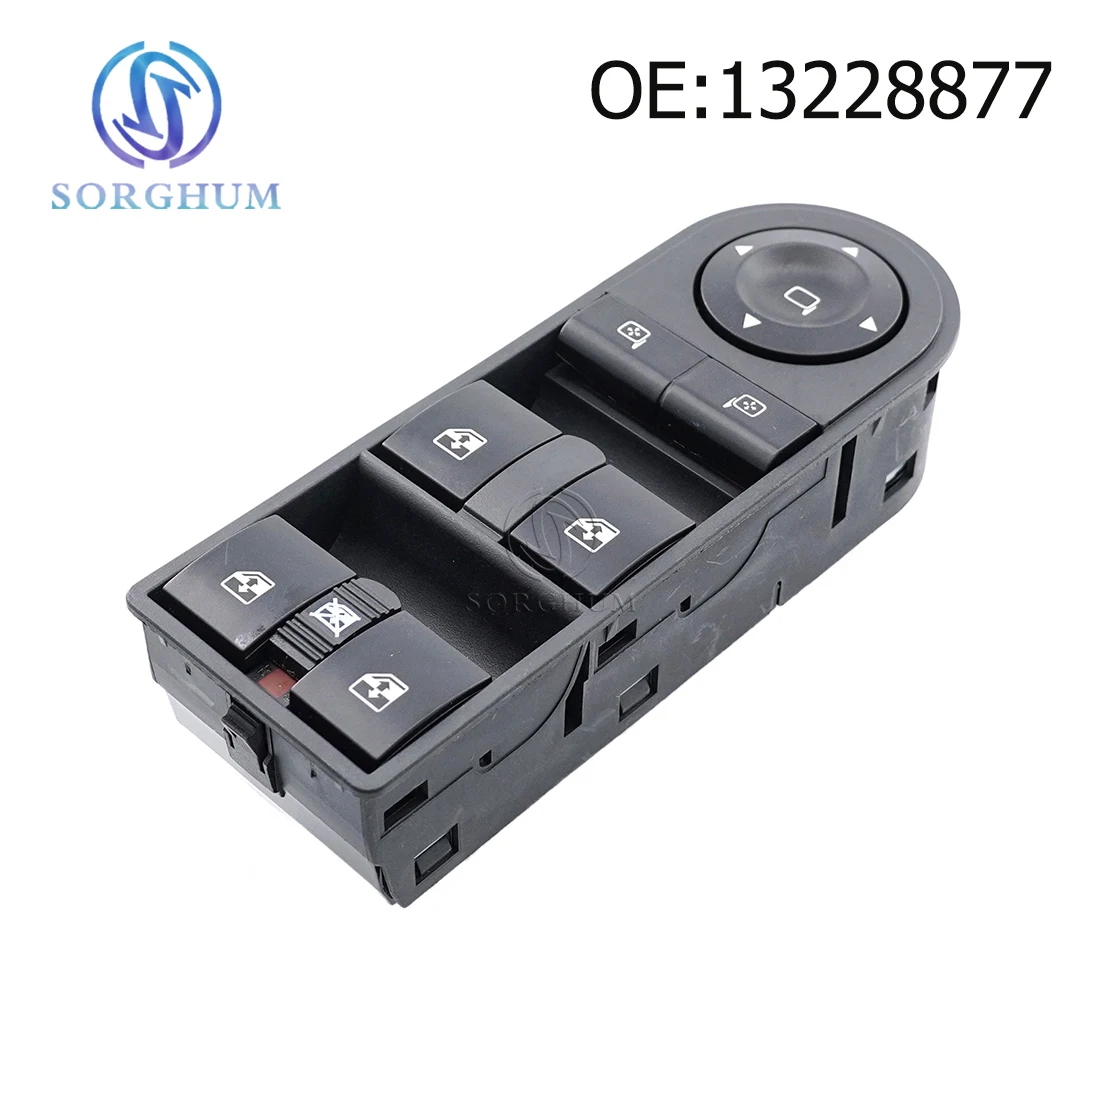 

SORGHUM Electric Power Master Window Control Switch For 04-15 Vauxhall Opel Astra H Zafira 13228877 13228698 13228699 13215153